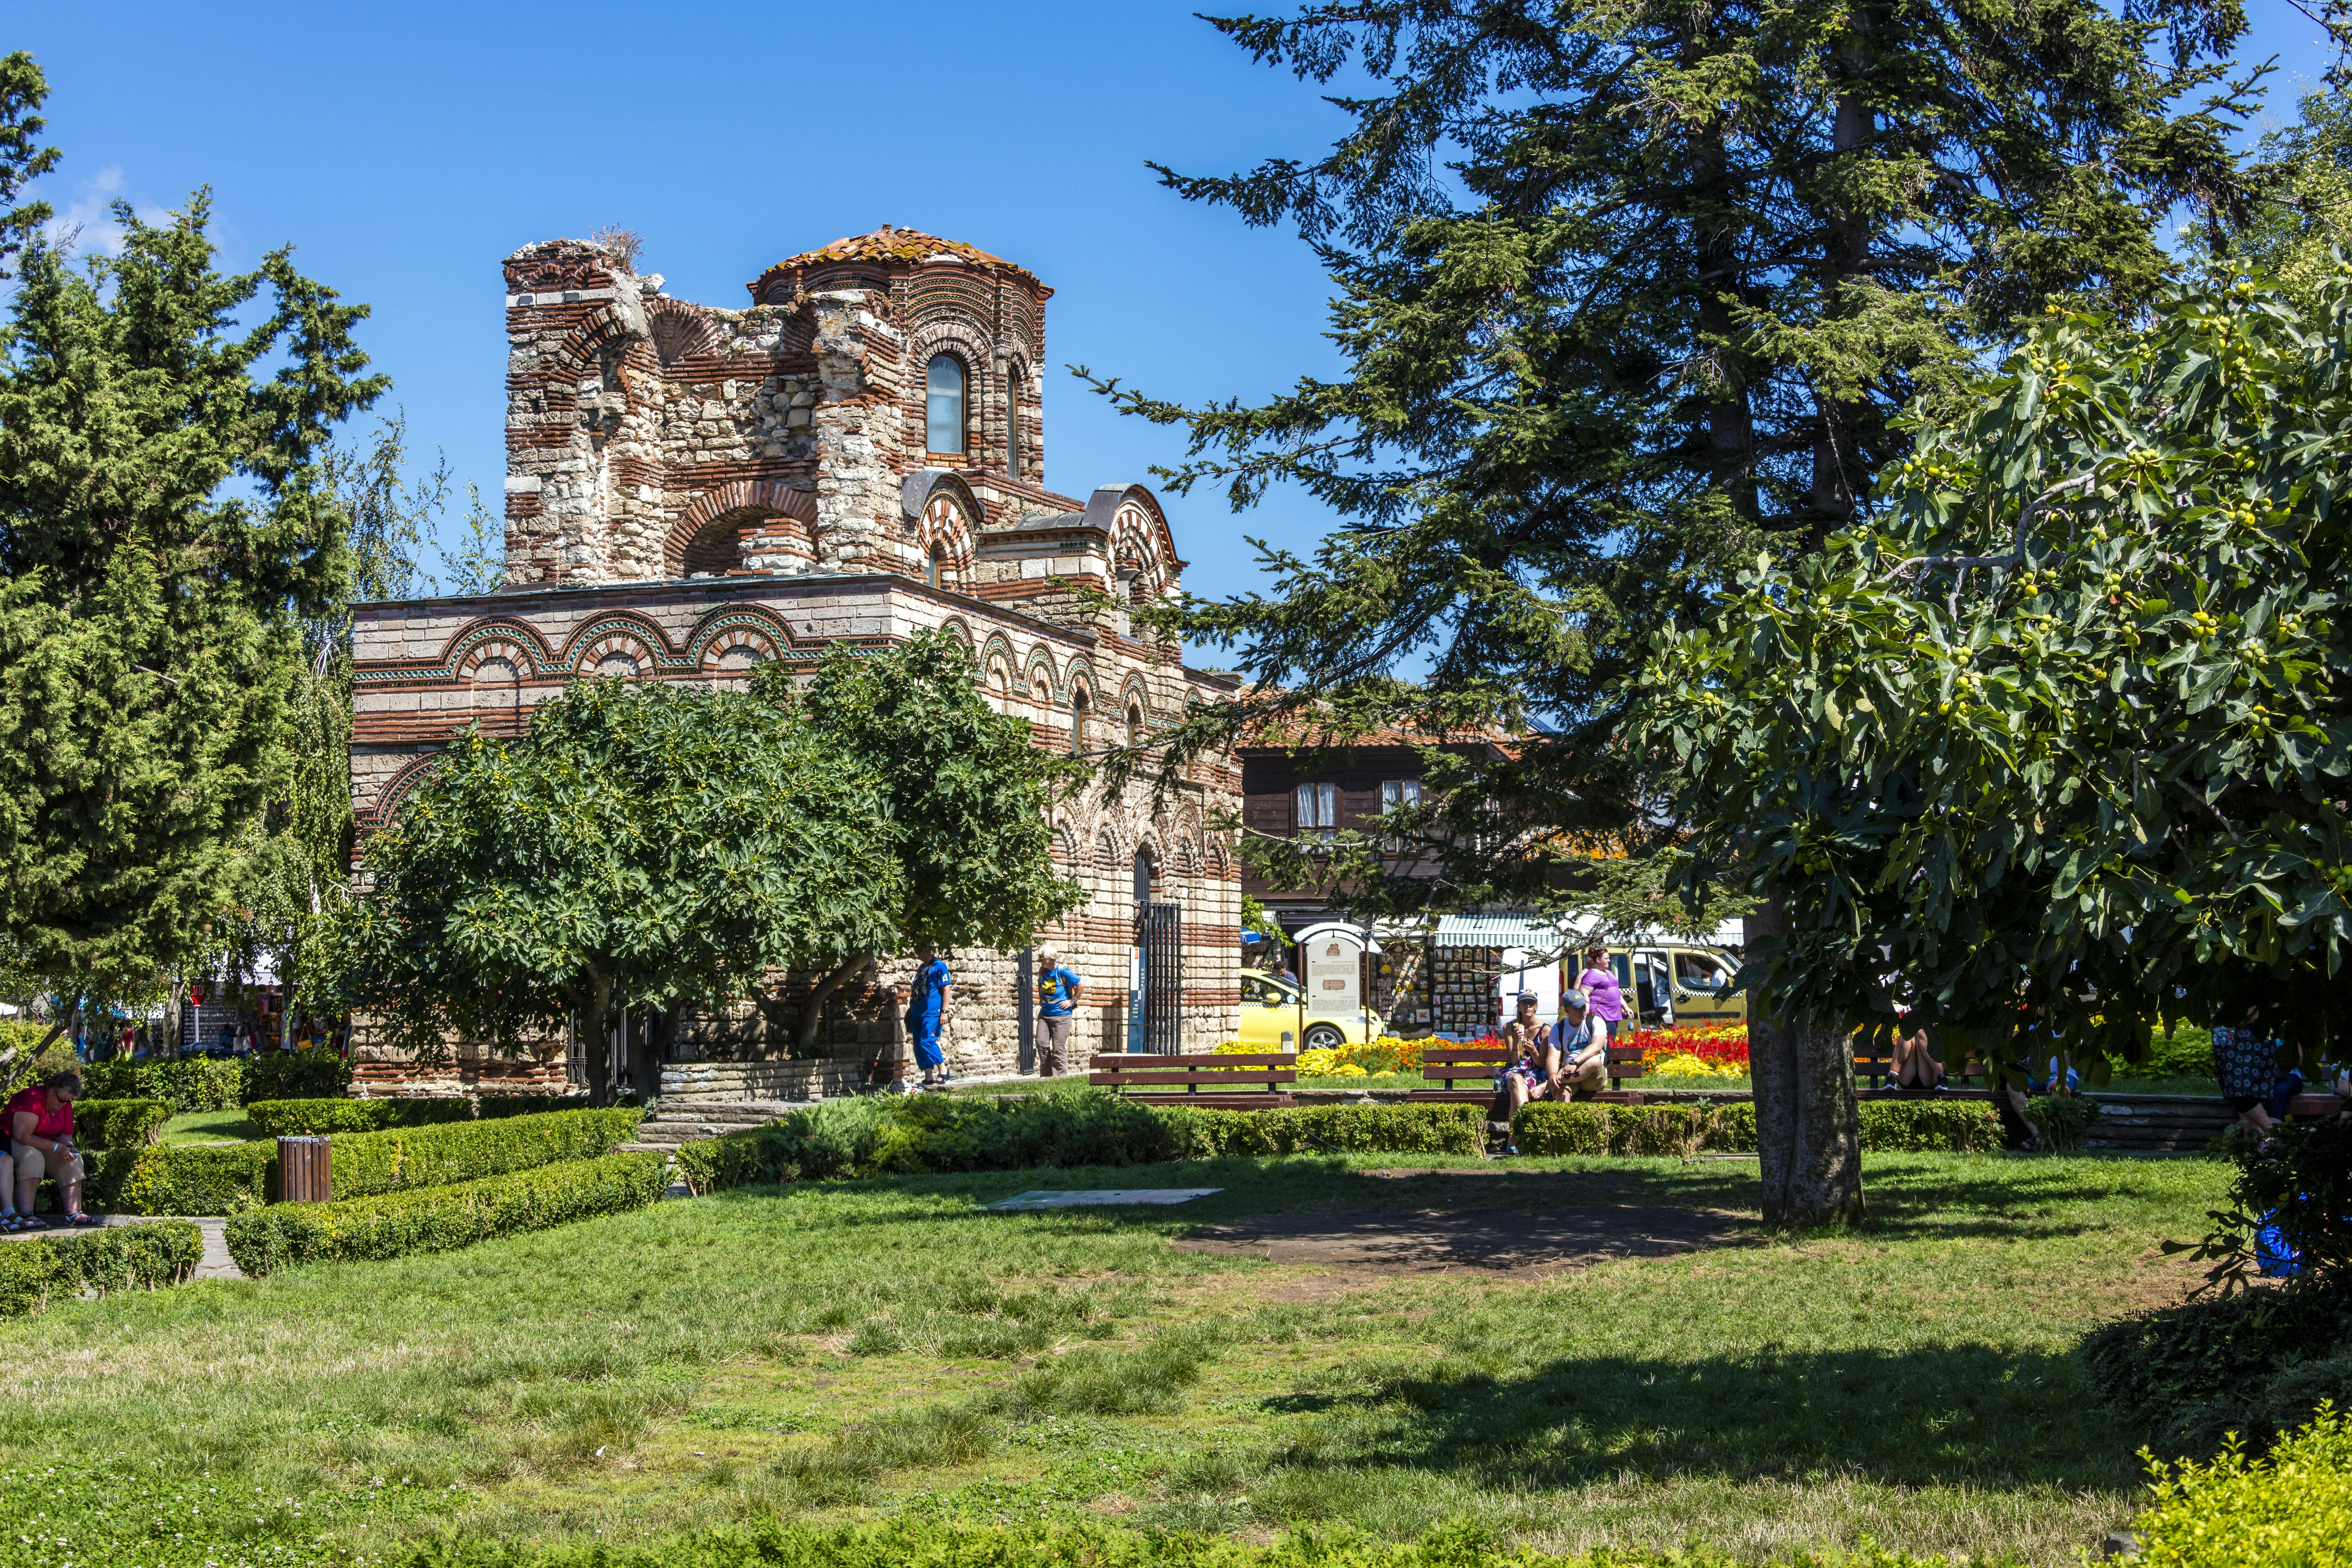 Discover Nessebar – from Obzor